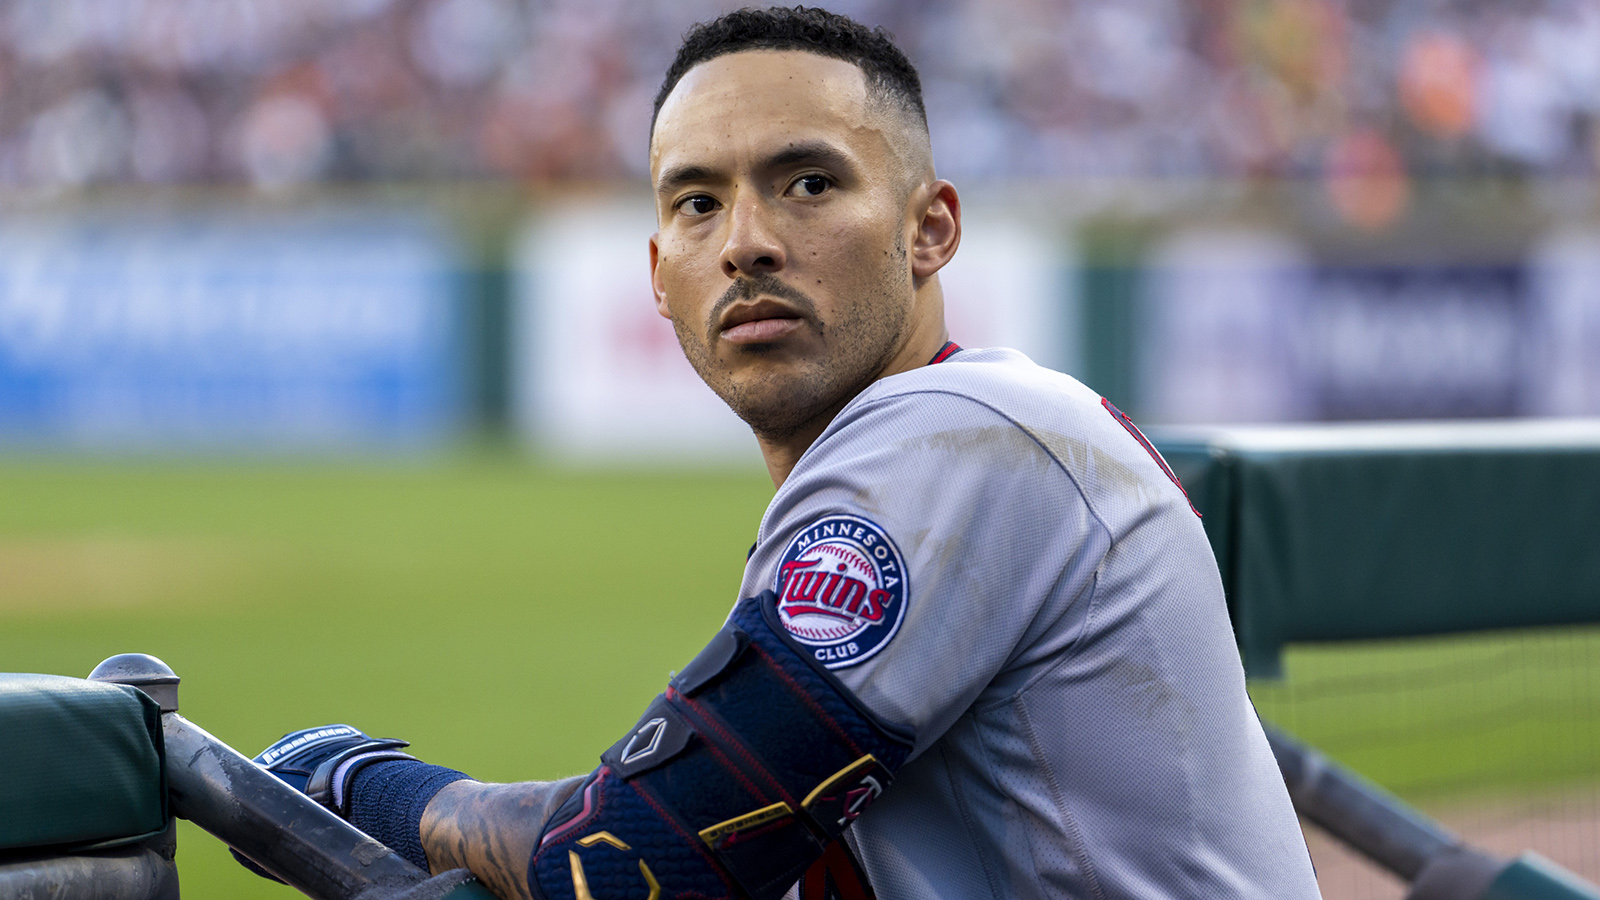 Carlos Correa: NY Mets sign superstar as Giants deal falls through